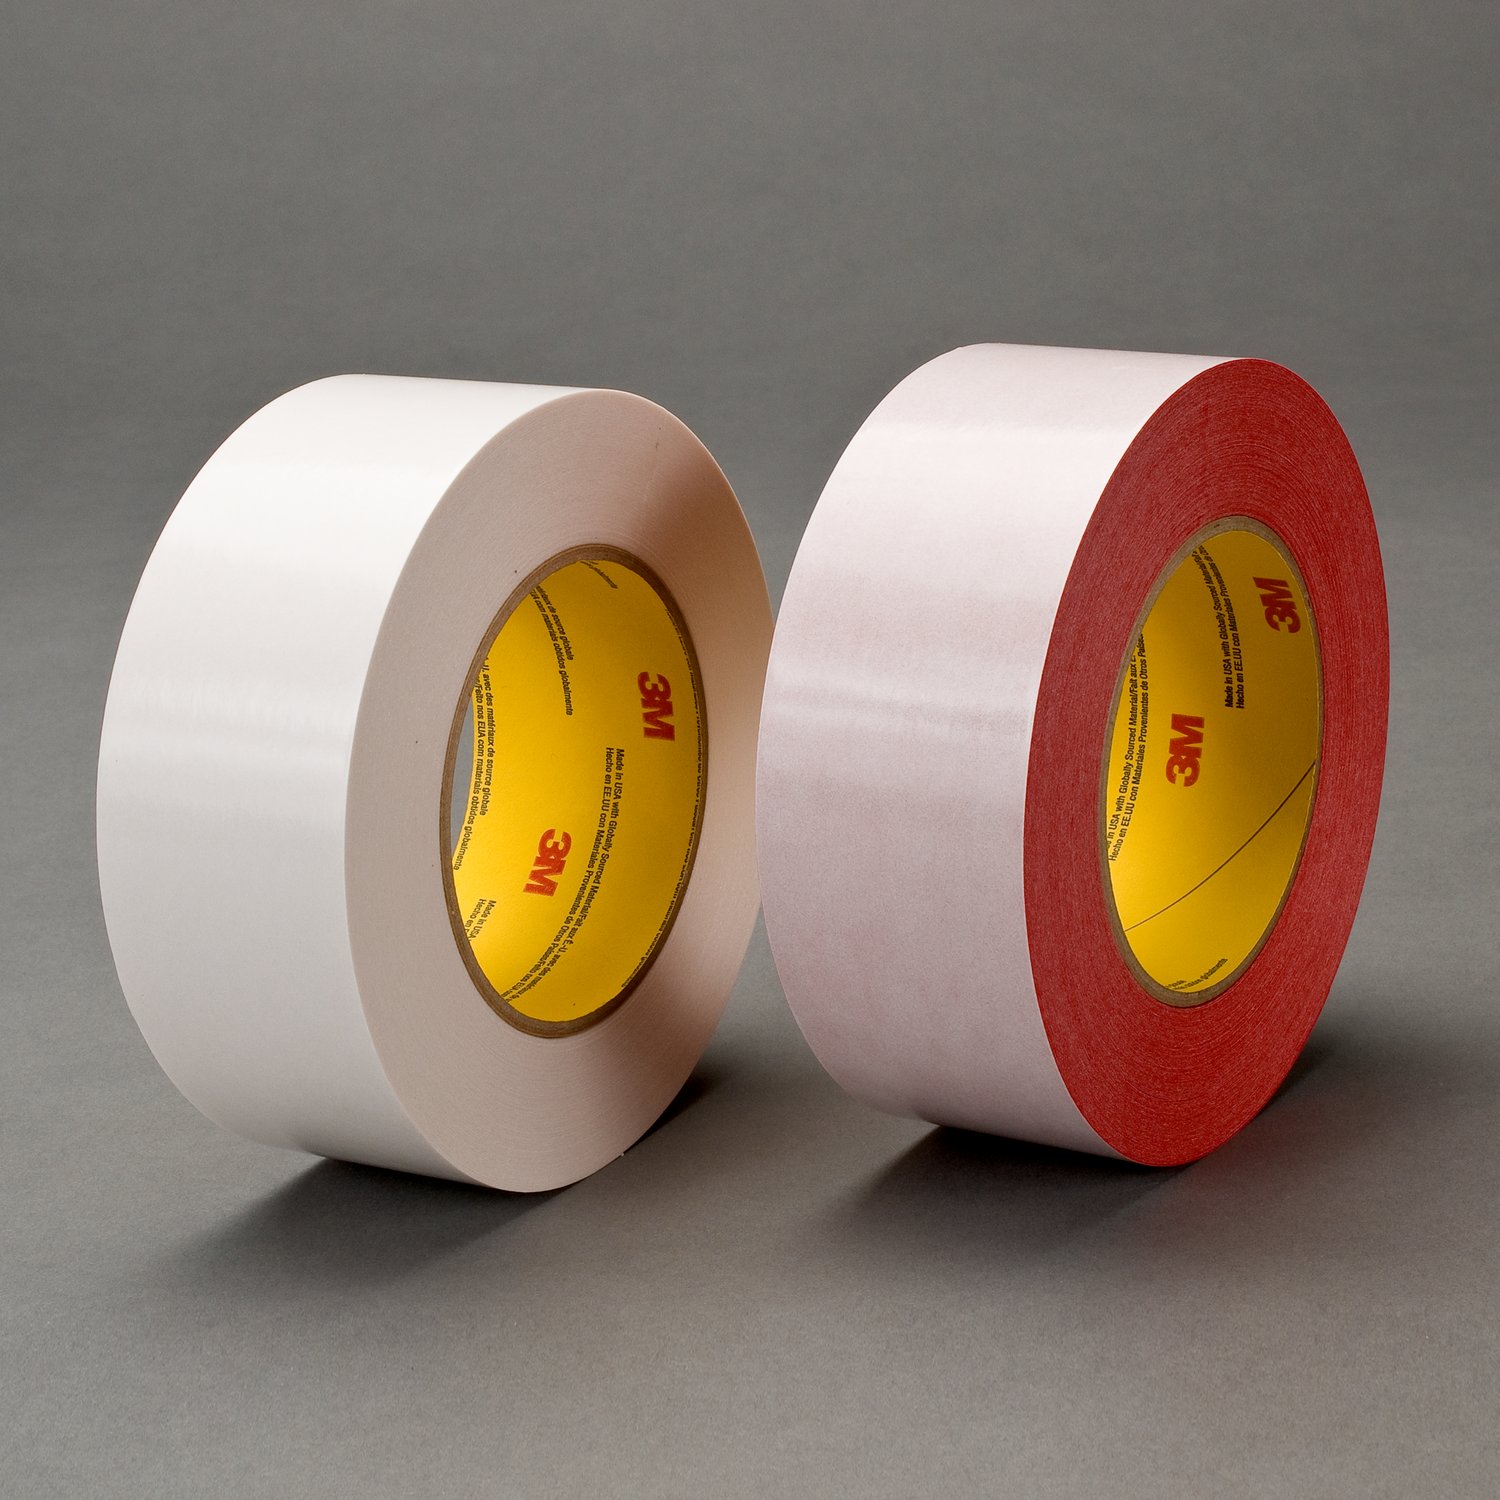 7010374332 - 3M Double Coated Tape 9738, Clear, 60 mm x 55 m, 4.3 mil, 20 rolls per
case